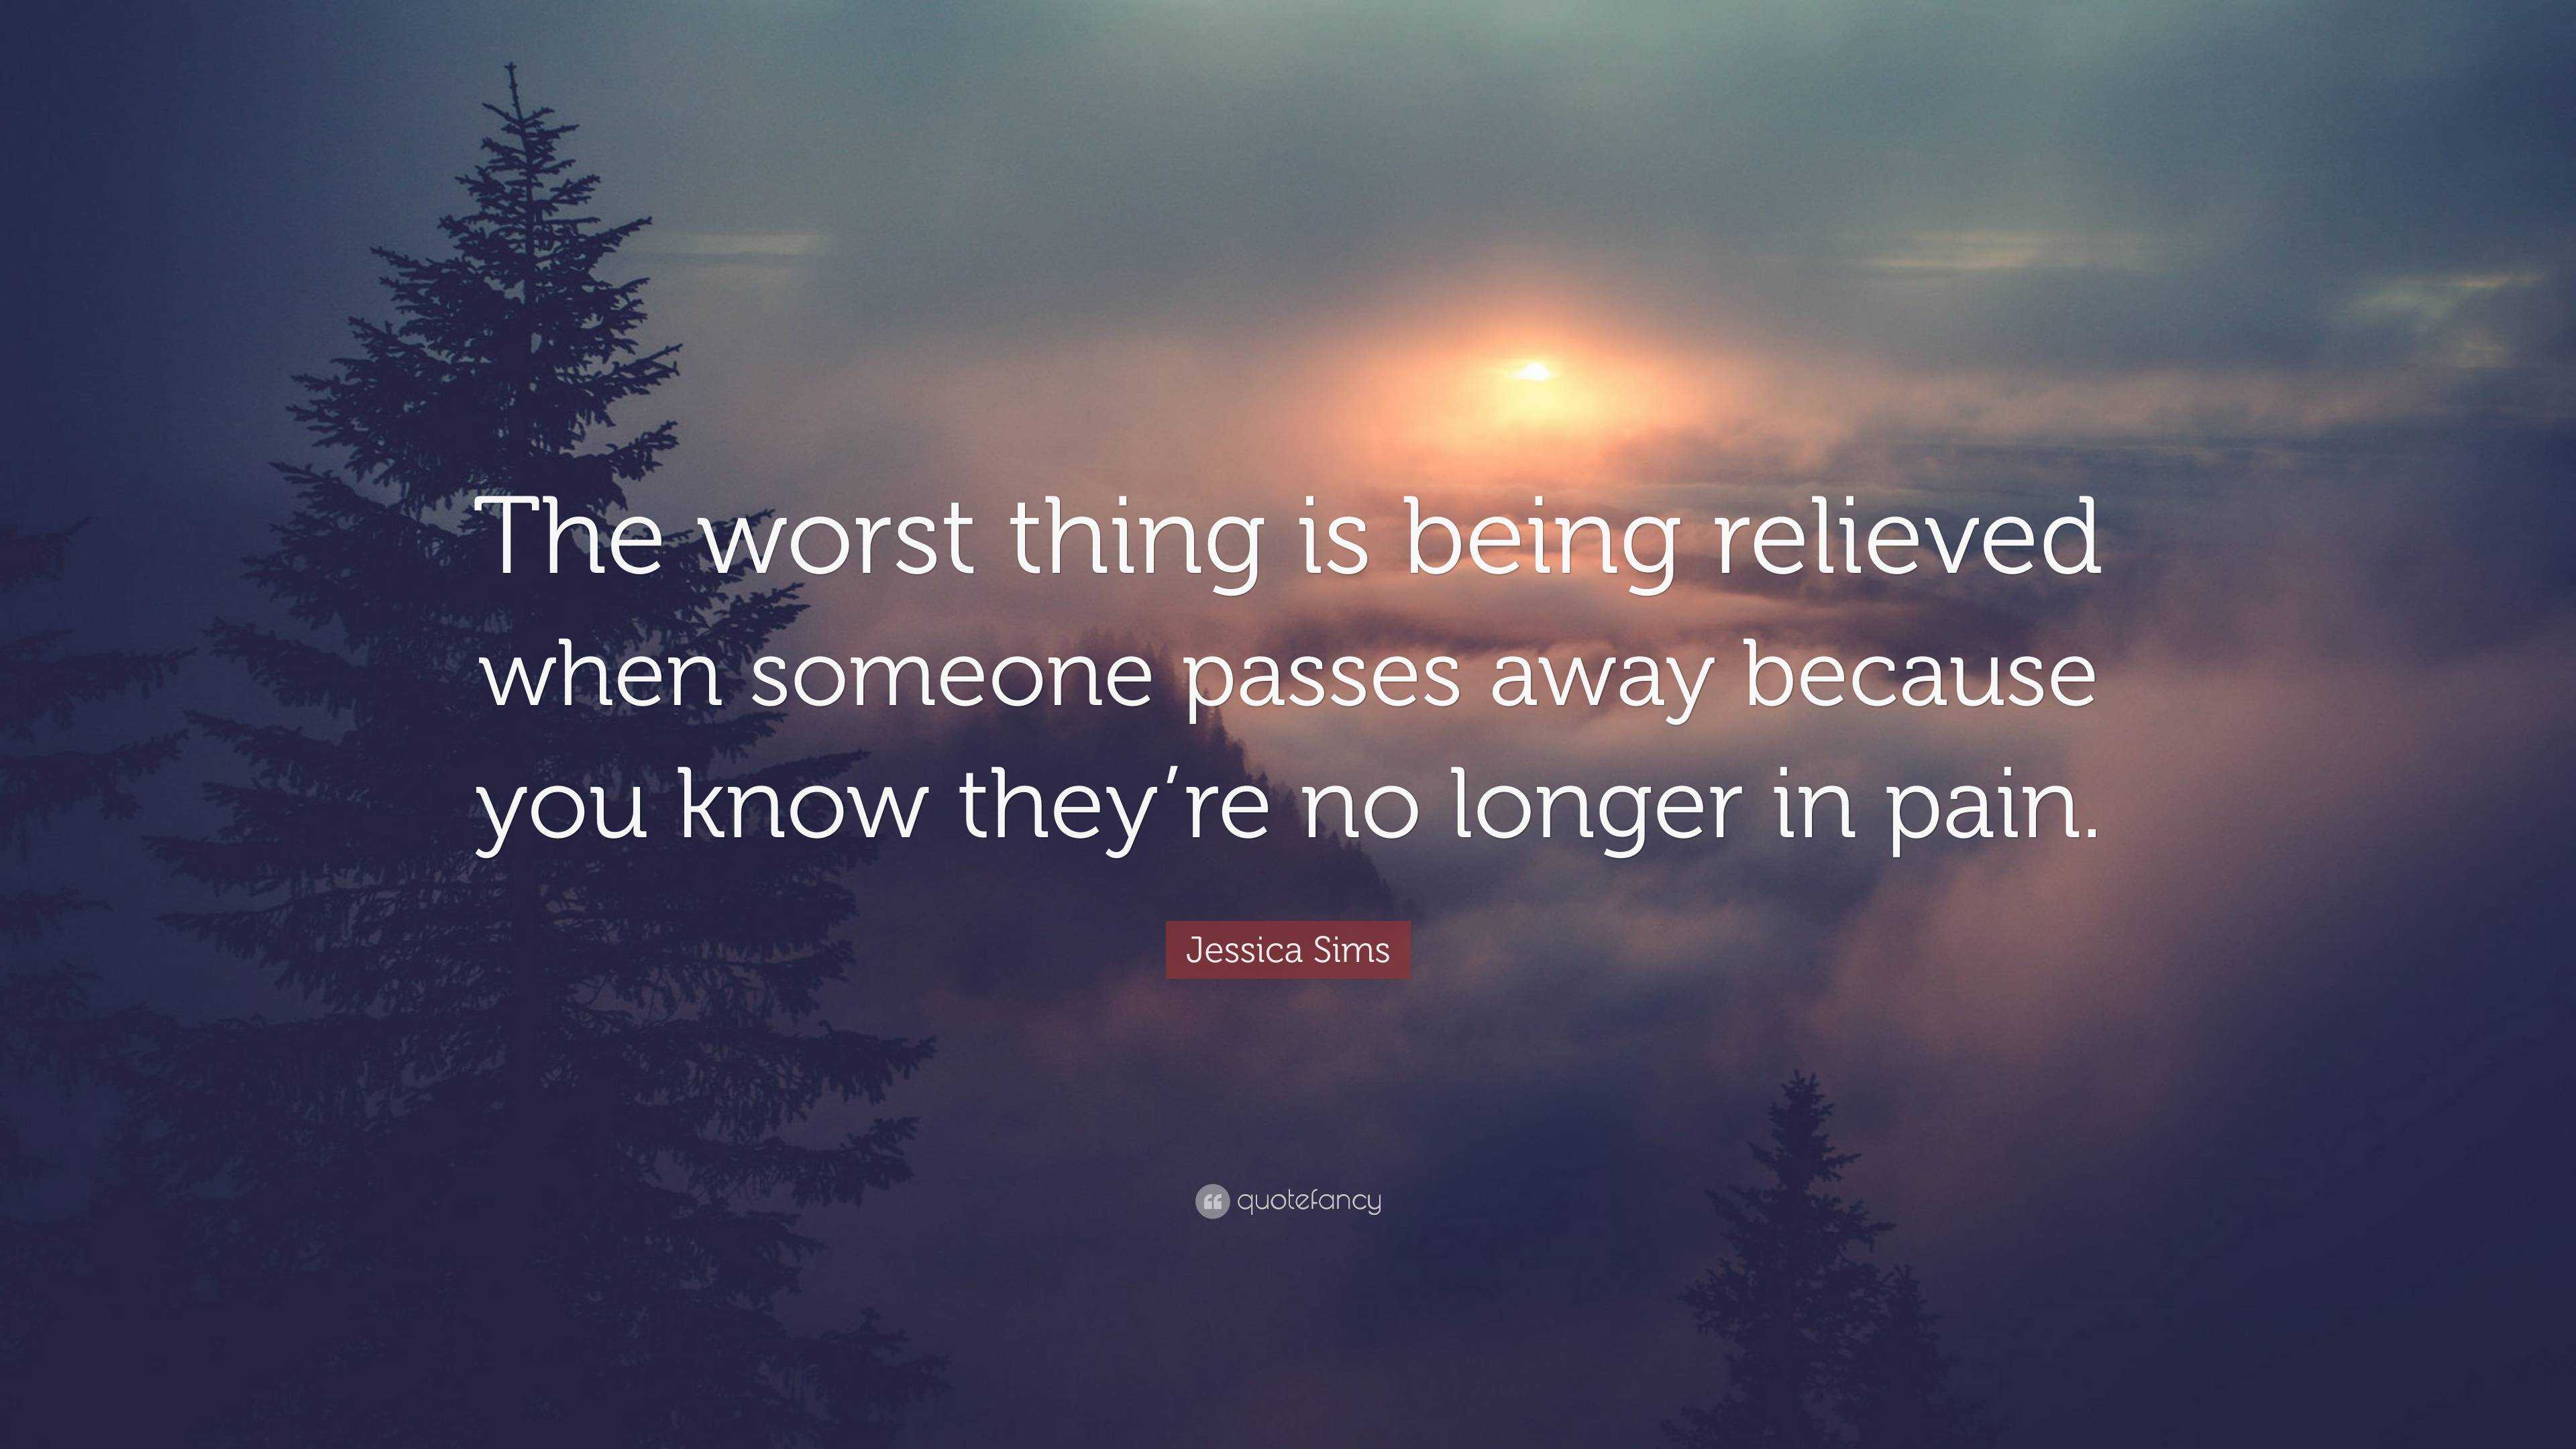 Jessica Sims Quote: “The worst thing is being relieved when someone ...